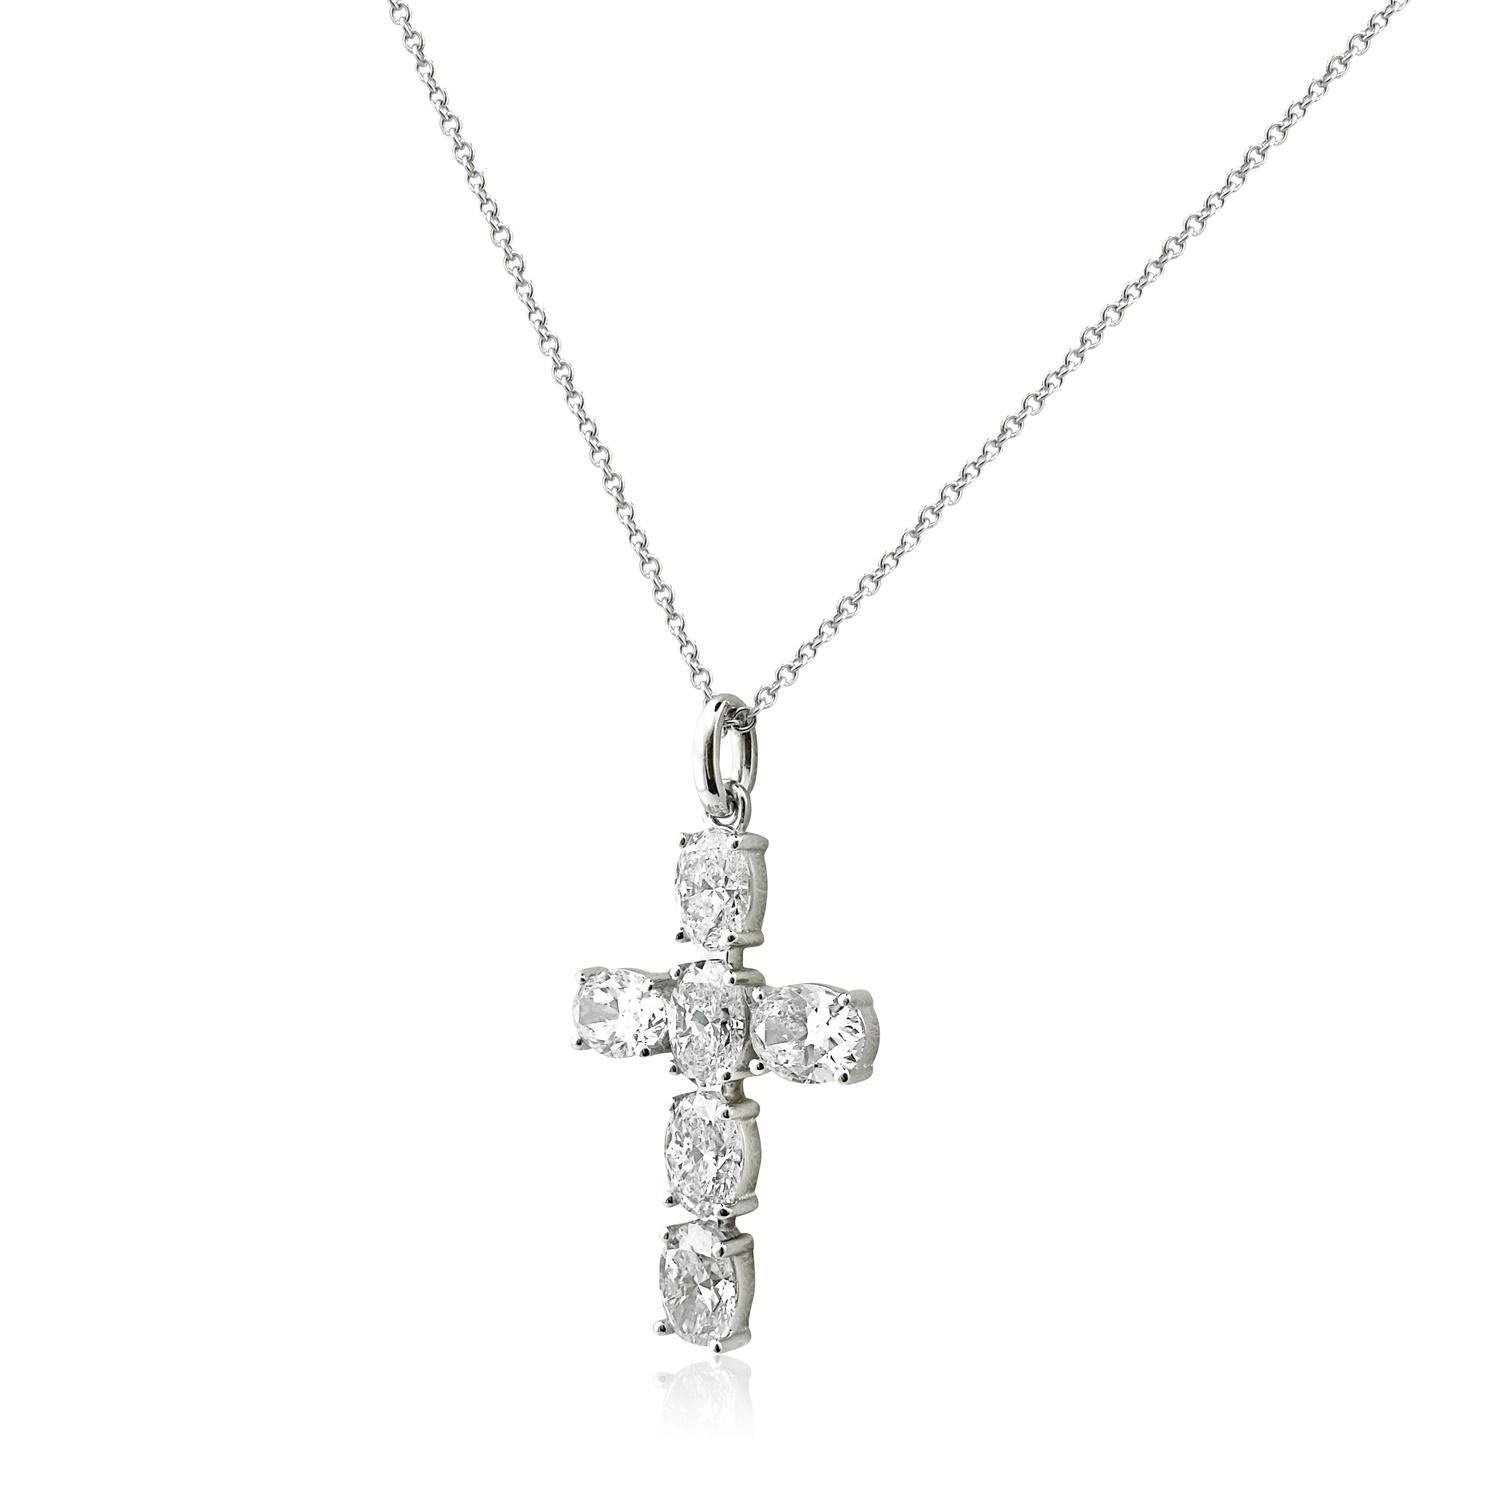 WHITE GOLD DIAMOND CROSS NECKLACE - 3.05 CT


Set in 18K White gold


Total diamond weight: 3.05 ct


[ 6 diamonds ]


Color: E-F


Clarity: VS


Total necklace weight: 5.23 grams


IGL Certified